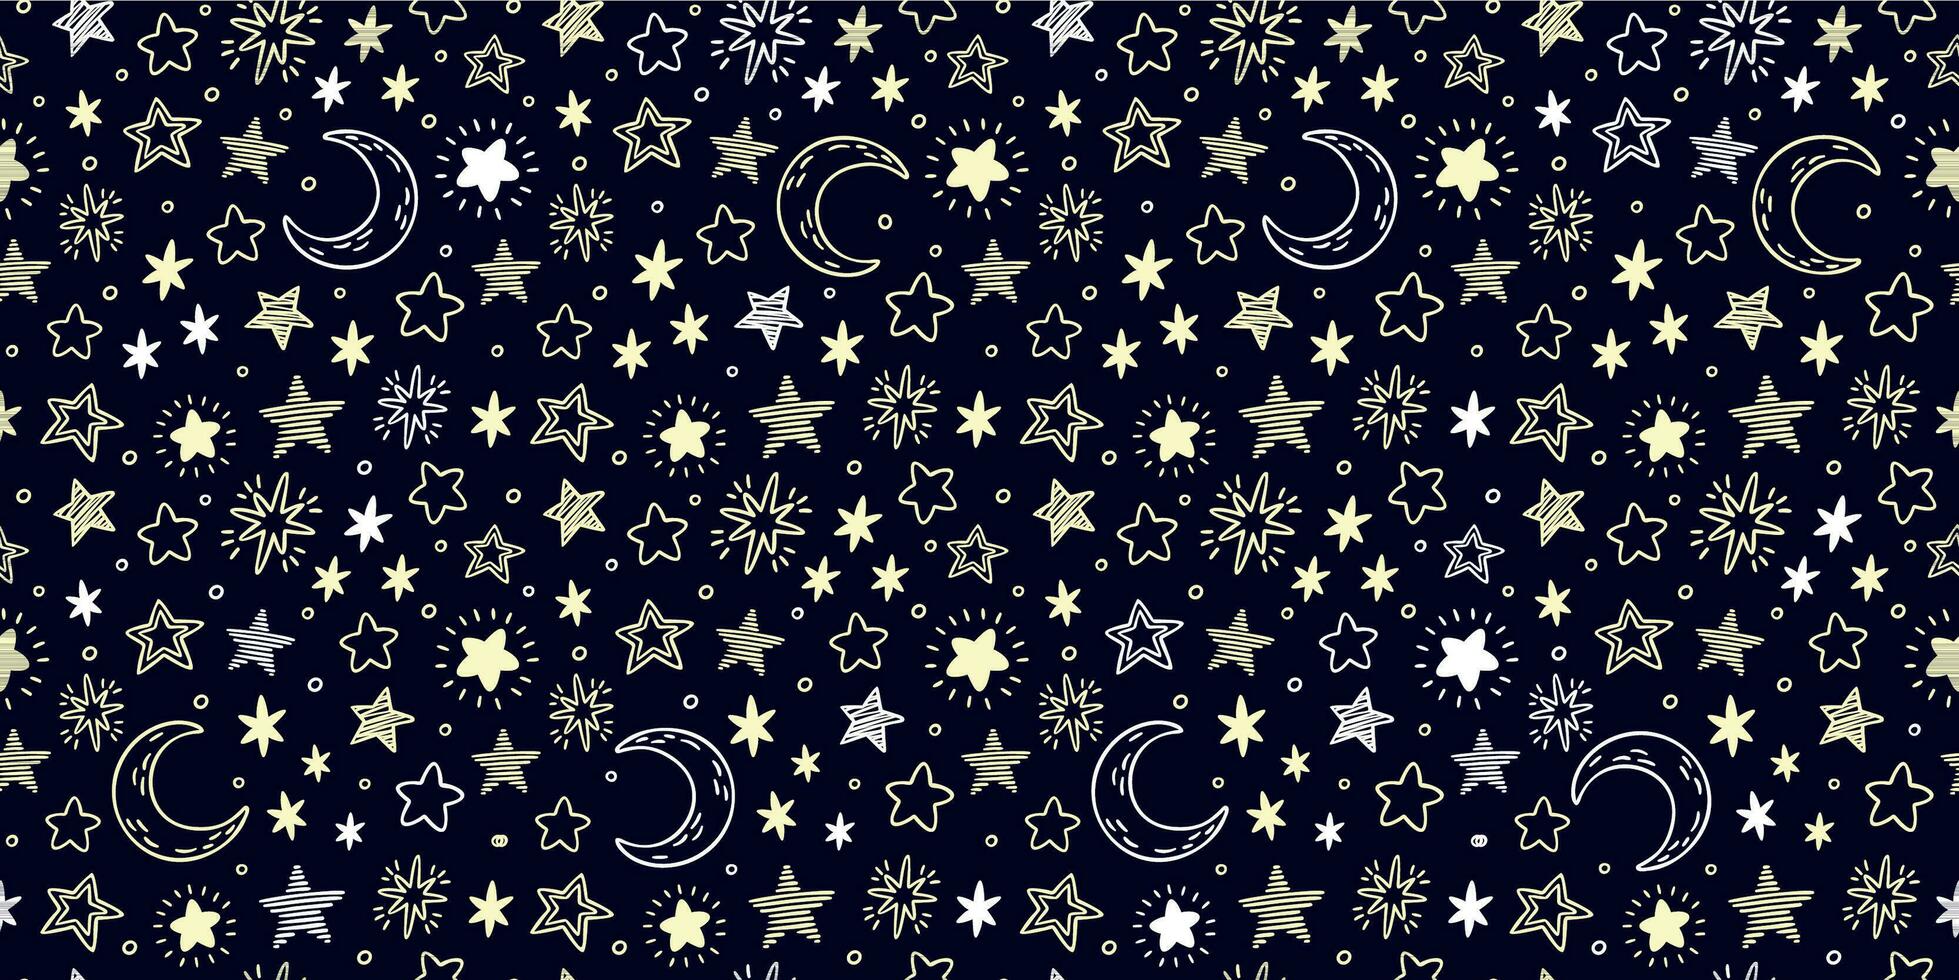 Star pattern. Starry sky, crescent moon and bright yellow stars seamless vector illustration